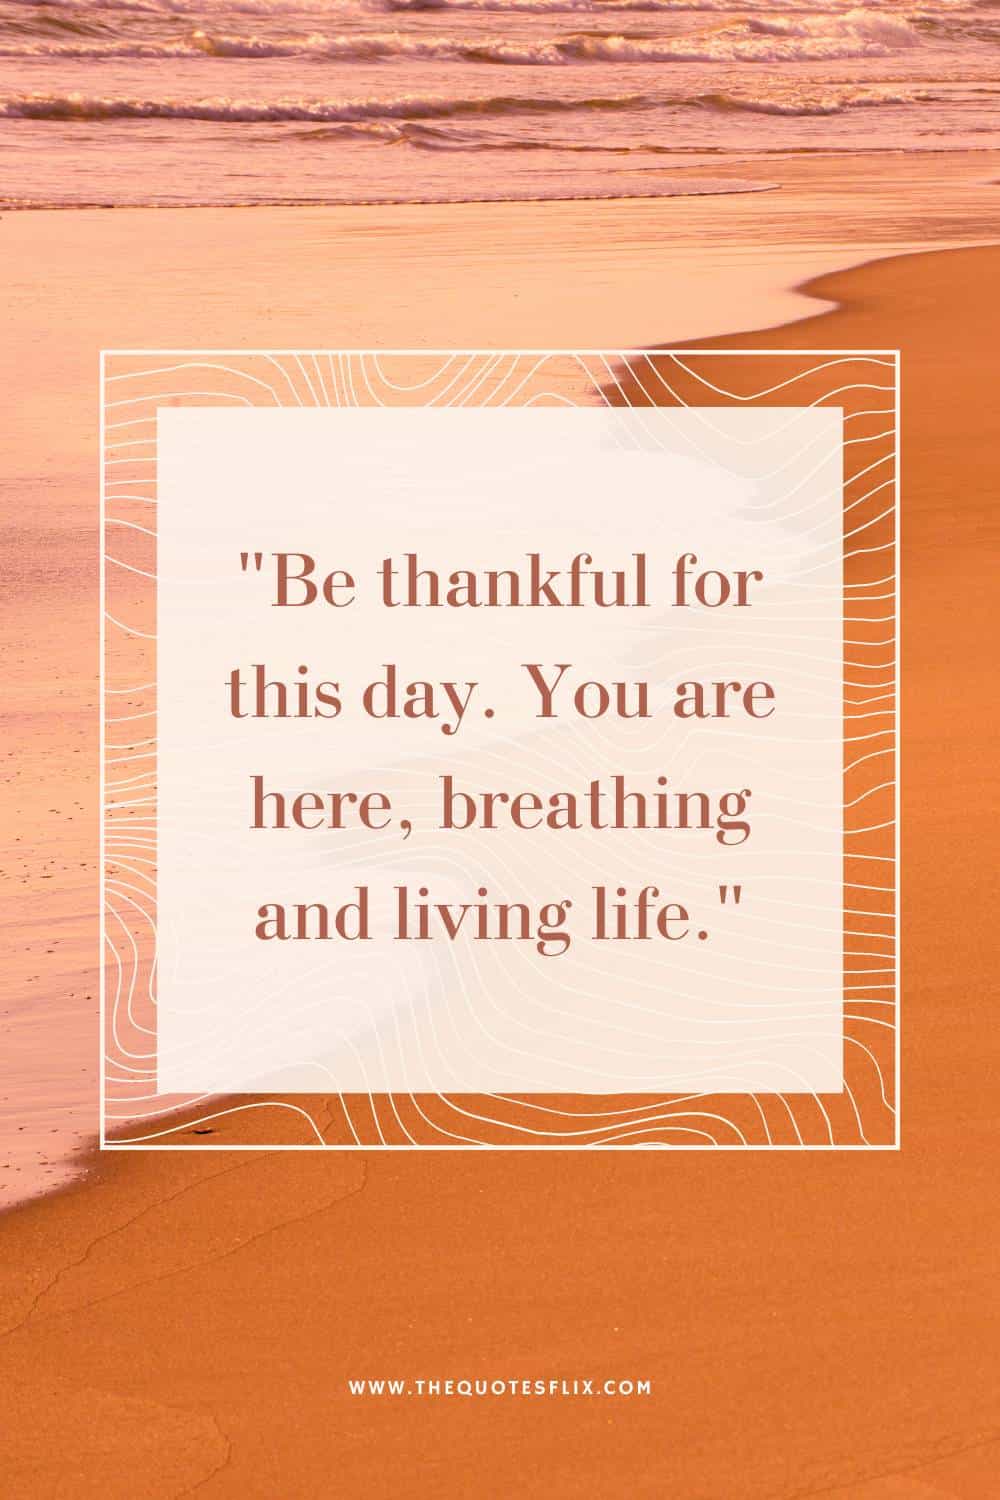 inspirational cancer quotes - be thankful for living life